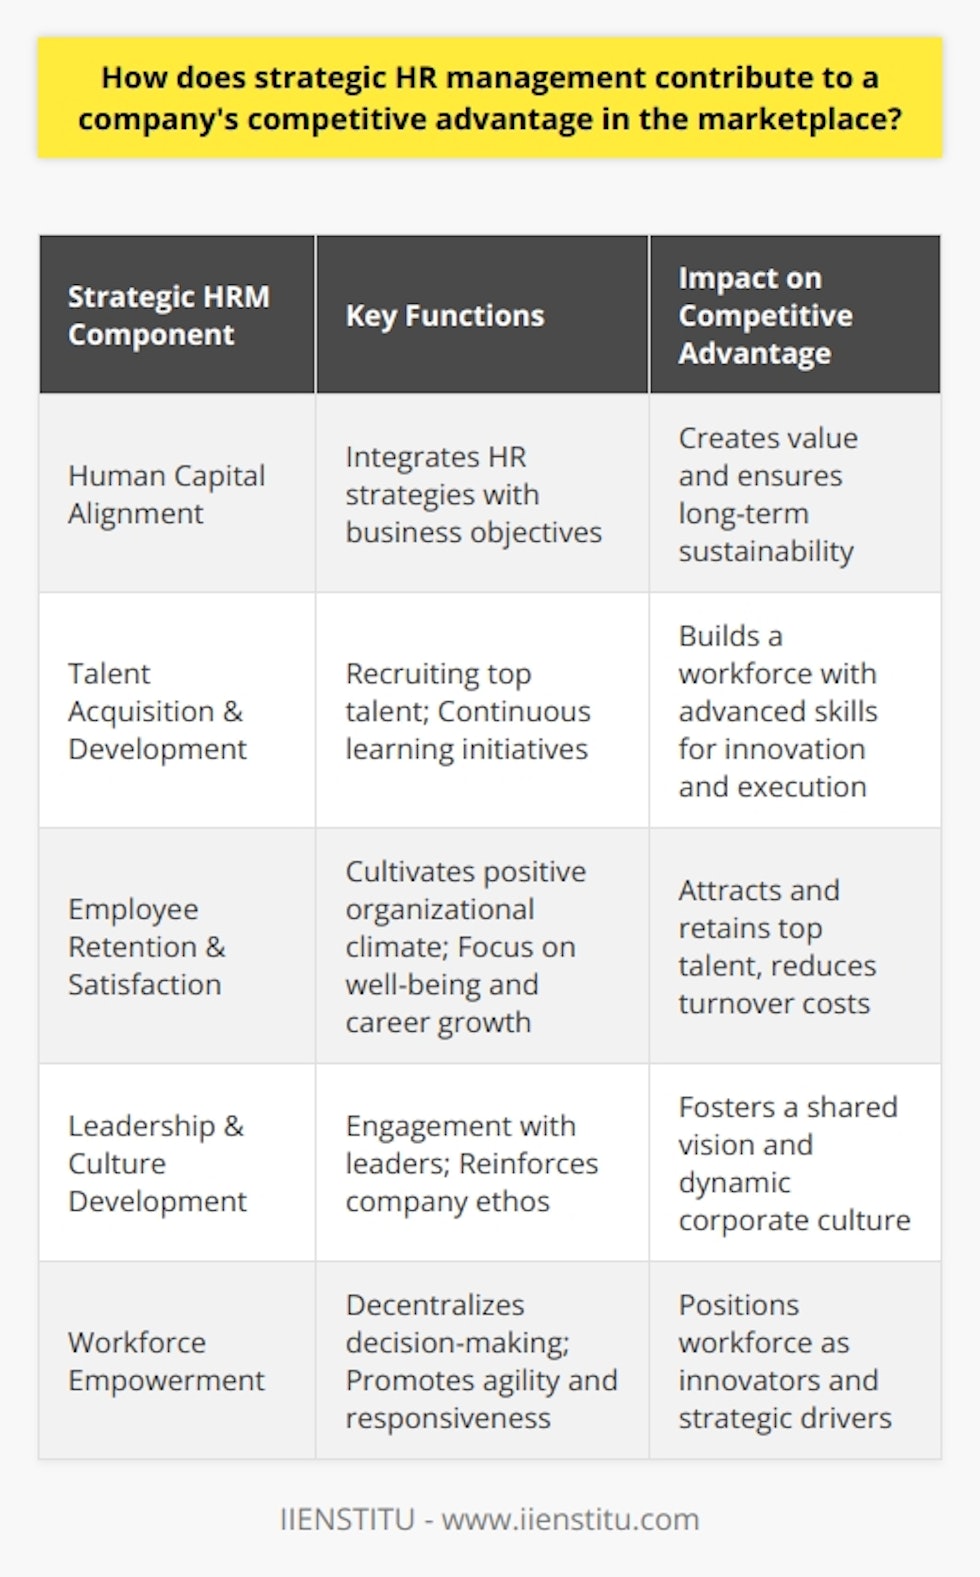 Strategic human resource (HR) management is a fundamental driver of a company's competitive advantage in the marketplace. It transforms the traditional HR functions into a strategic framework that aligns the company's human capital with its business objectives. This seamless integration of HR strategies with business goals serves as a catalyst for value creation and long-term sustainability.By effectively leveraging human capital, strategic HR management enables a company to attain superior performance. This is achieved by recruiting top-tier talent and nurturing a skilled workforce that is proficient in executing company strategy. HR practices centered around continuous learning and development ensure that employees possess the cutting-edge skills needed to innovate and excel in their roles.The nexus between employee retention and satisfaction is another arena where strategic HR management contributes to a competitive advantage. By cultivating an exemplary organizational climate, strategic HR initiatives attract invaluable talent which might otherwise fall into the hands of competitors. A robust commitment to employee well-being and work-life balance, along with clear career progression paths, fosters a culture that prizes loyalty and minimizes costly turnover rates.Equally influential in strategic HR management is the development of leadership and organizational culture. Through continuous engagement with leaders at all organizational levels, HR reinforces the company ethos, facilitating a shared vision throughout the workforce. The eclosion of this shared vision into a dynamic corporate culture breeds agility, adaptability, and an unwavering commitment to the company’s strategic goals.Moreover, strategic HR management emphasizes the empowerment of the workforce, which aids in decentralizing decision-making processes. Such empowerment accelerates organizational responsiveness by eliminating bureaucratic hurdles and fostering a climate of swift, decisive action. The application of technology and analytics in HR also avails leaders of real-time data for more sophisticated and prompt decision-making, ensuring that the organization can pivot rapidly in response to market shifts.In embracing the principles of strategic HR management, companies fortify their market position by building a workforce that is not merely a cog in the organizational machine but the driving engine of innovation, strategic direction, and market responsiveness. This workforce, sculpted by forward-thinking HR strategies, is a reservoir of competitive advantage that when harnessed, propels the company to the forefront of industry success.